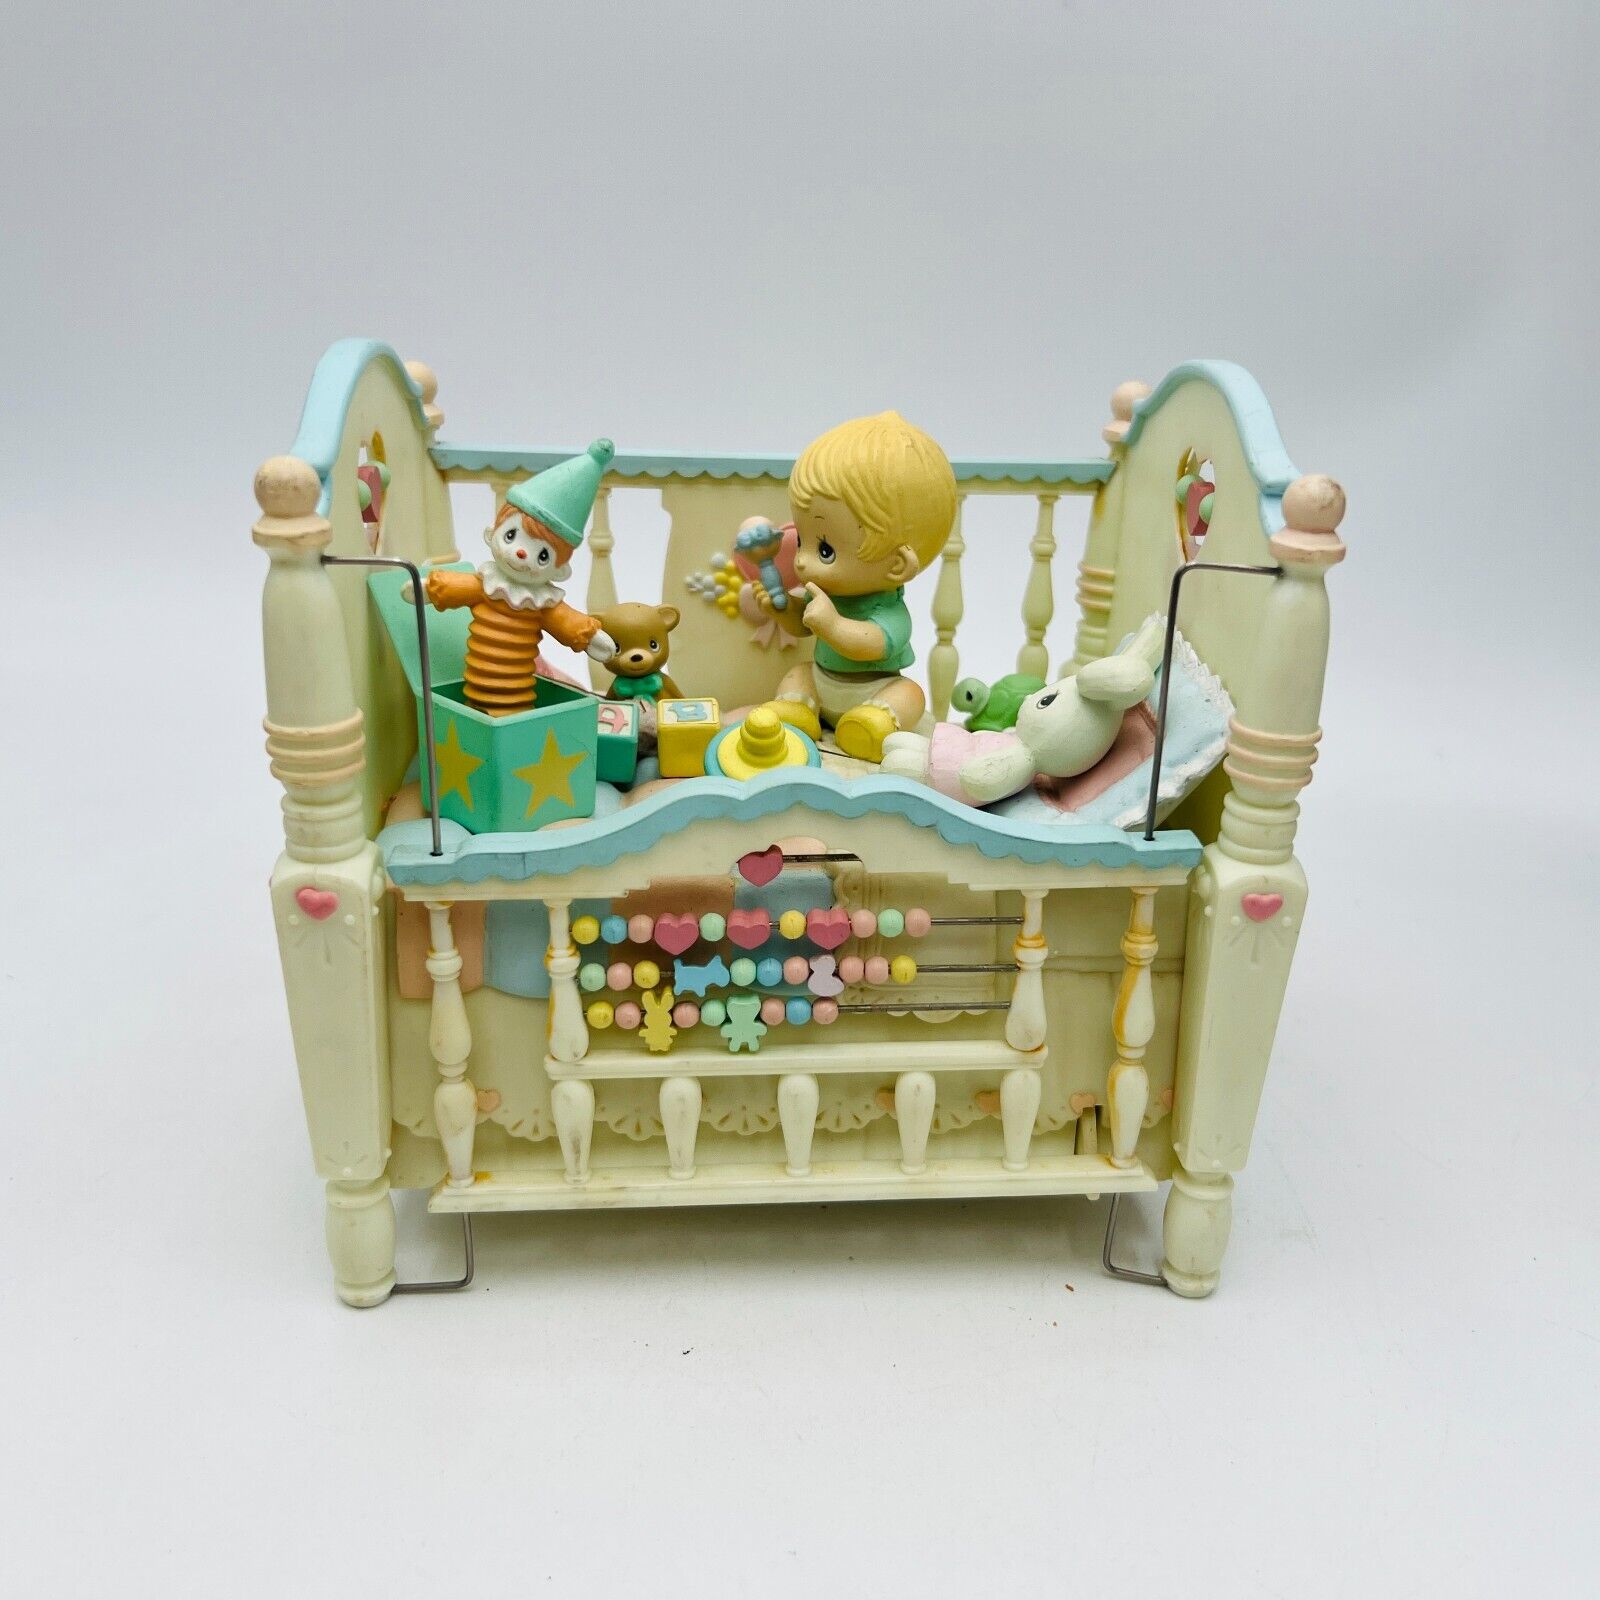 Precious Moments Expressions Crib 1993 Enesco HEAVEN BLESS YOU-Sound not Working